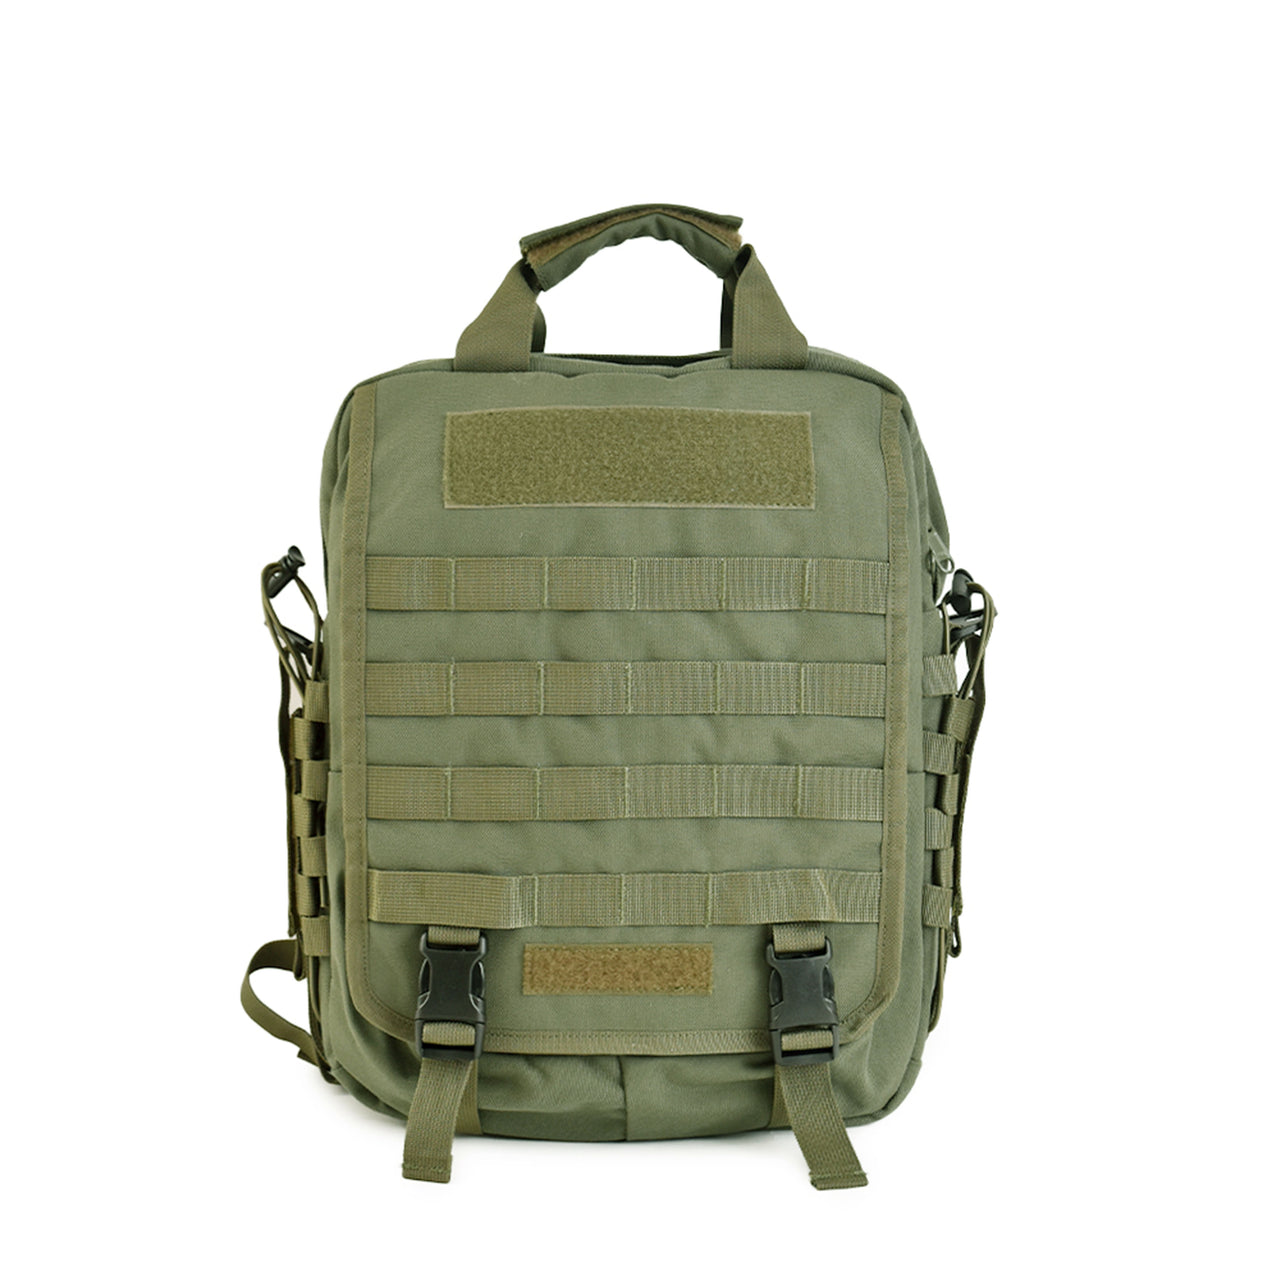 Combat Sniper Backpack Disc Golf Bag by Dynamic Discs - Disc-Kings